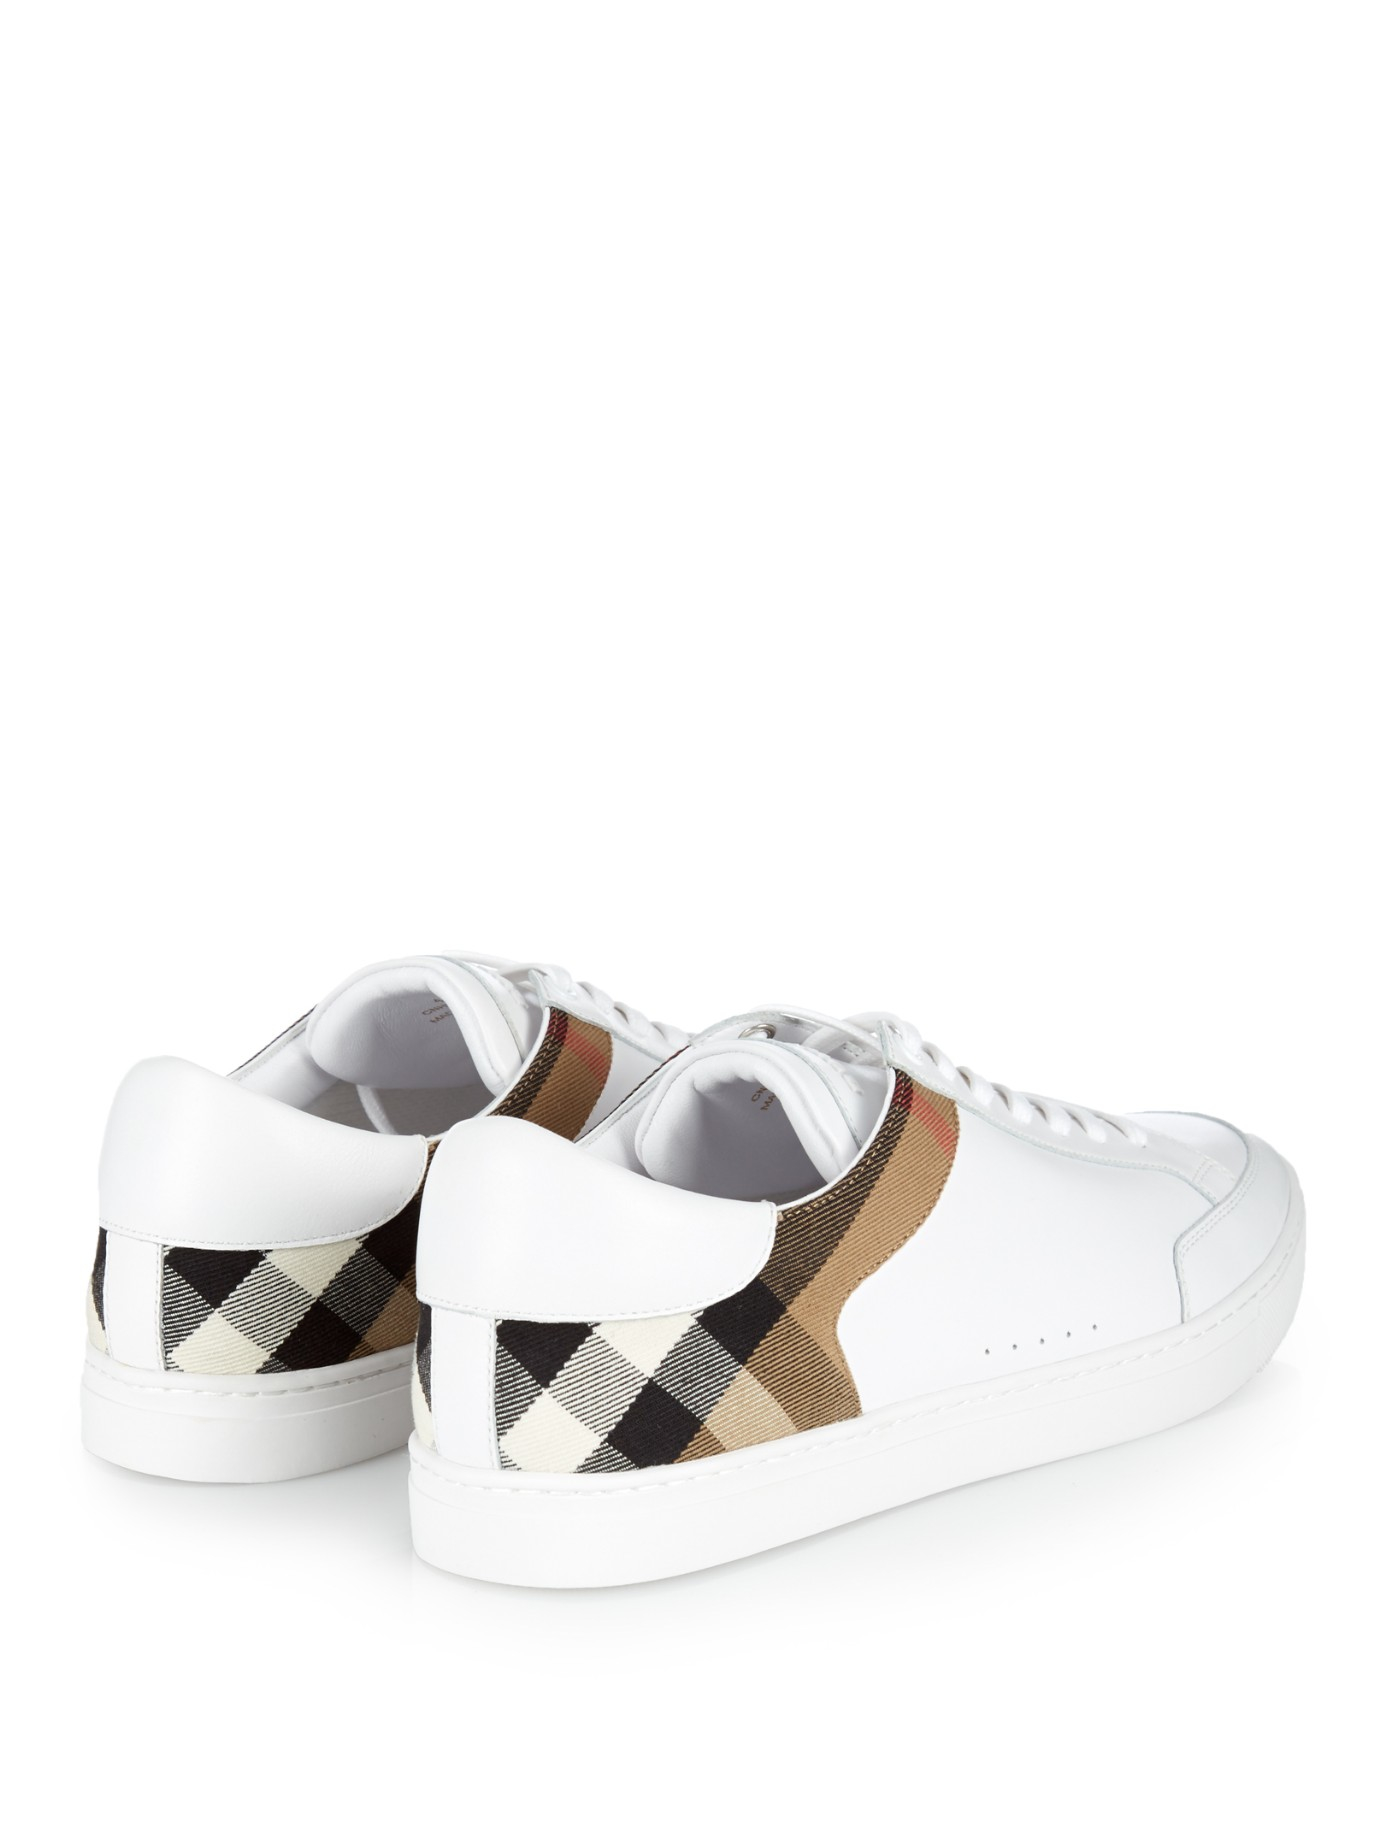 burberry house slippers